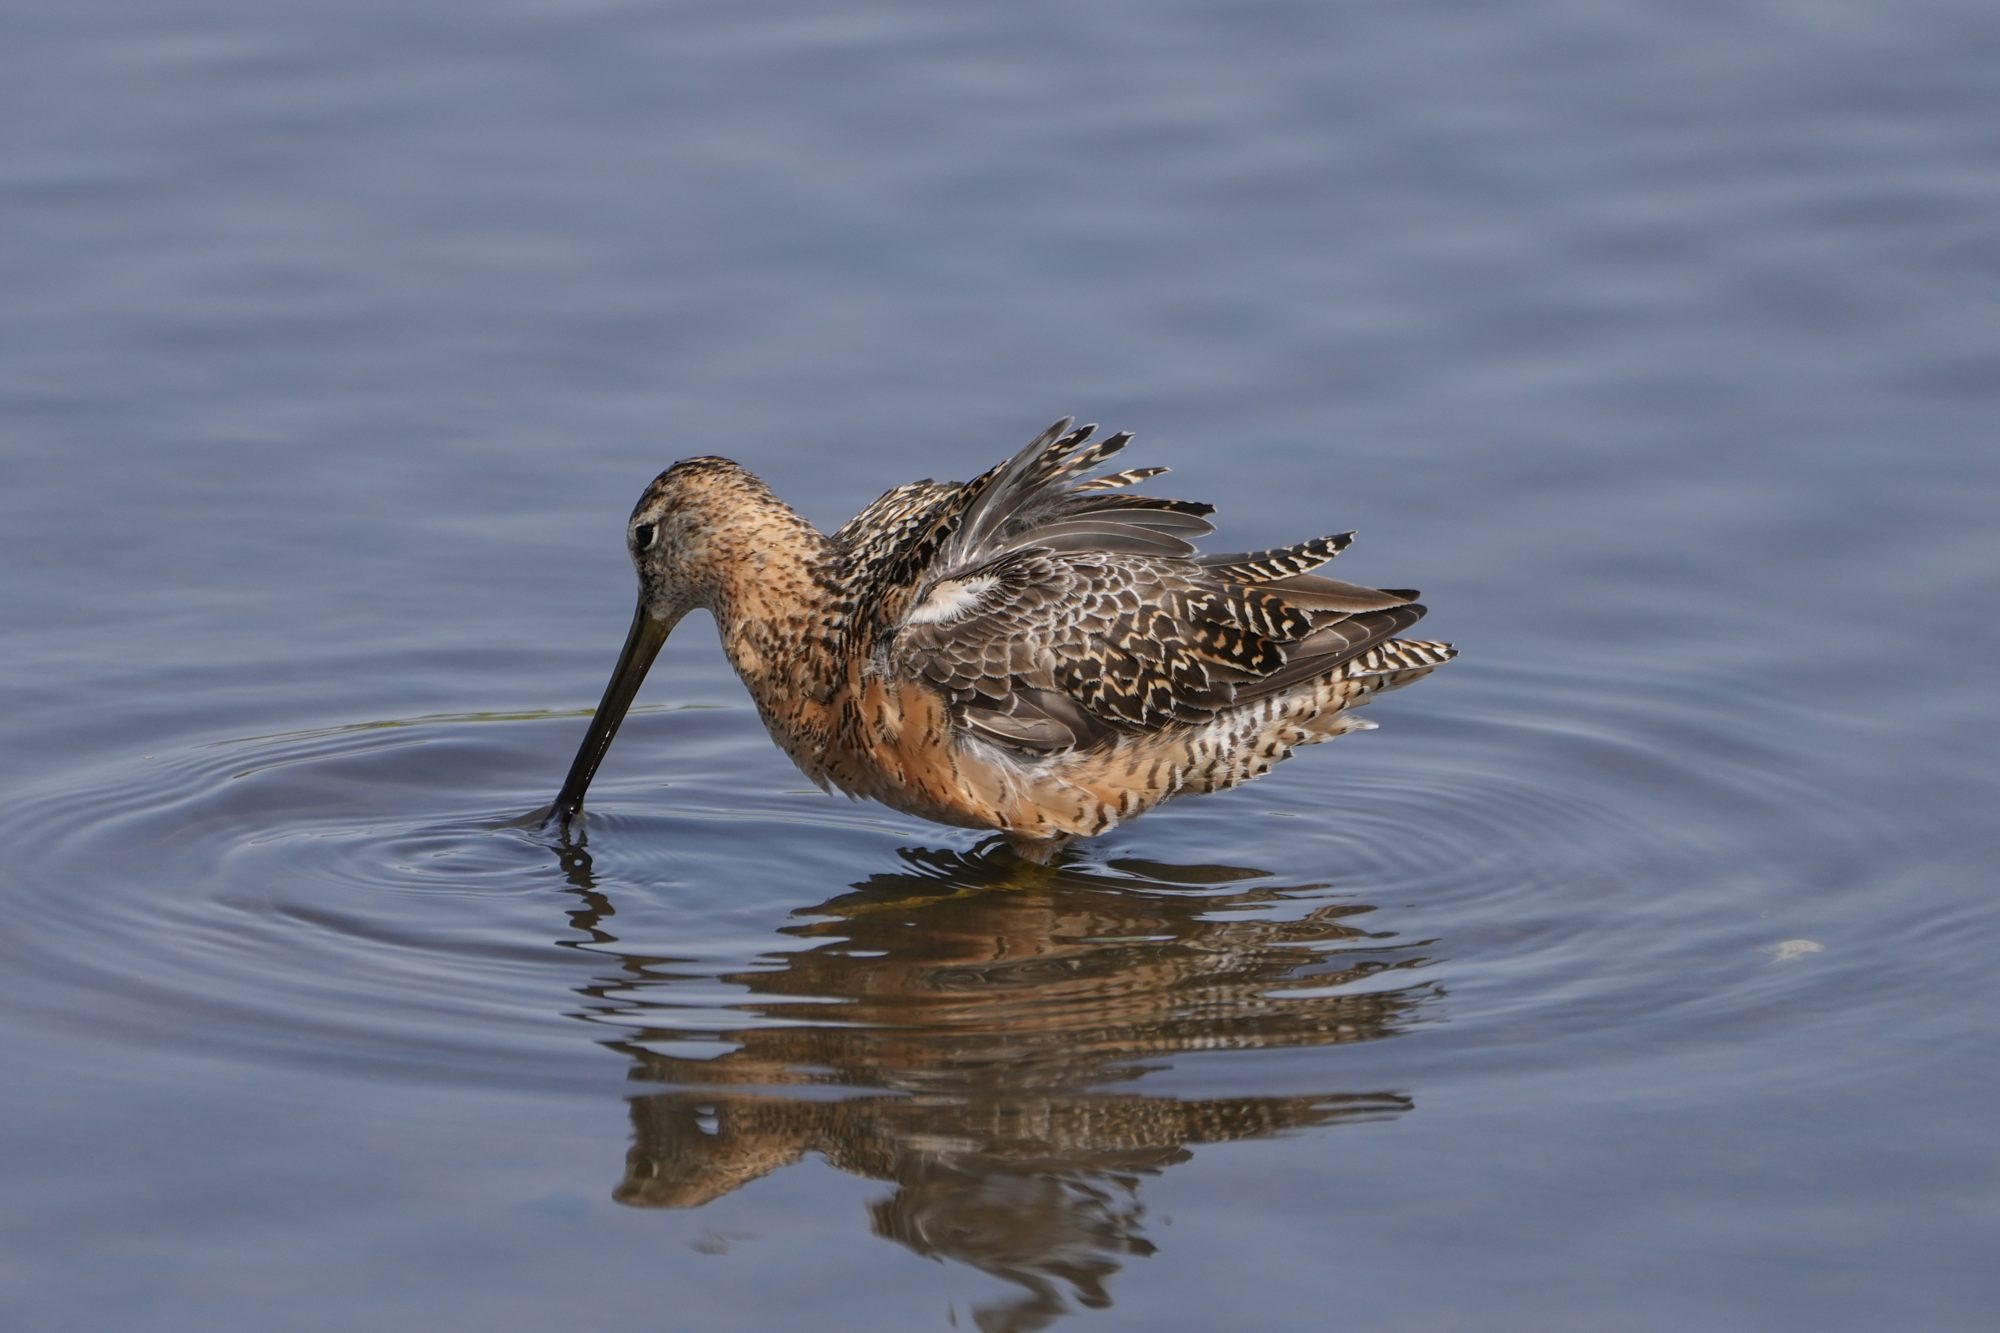 A Long-billed Dowitcher is foraging, its back feathers slightly ruffled